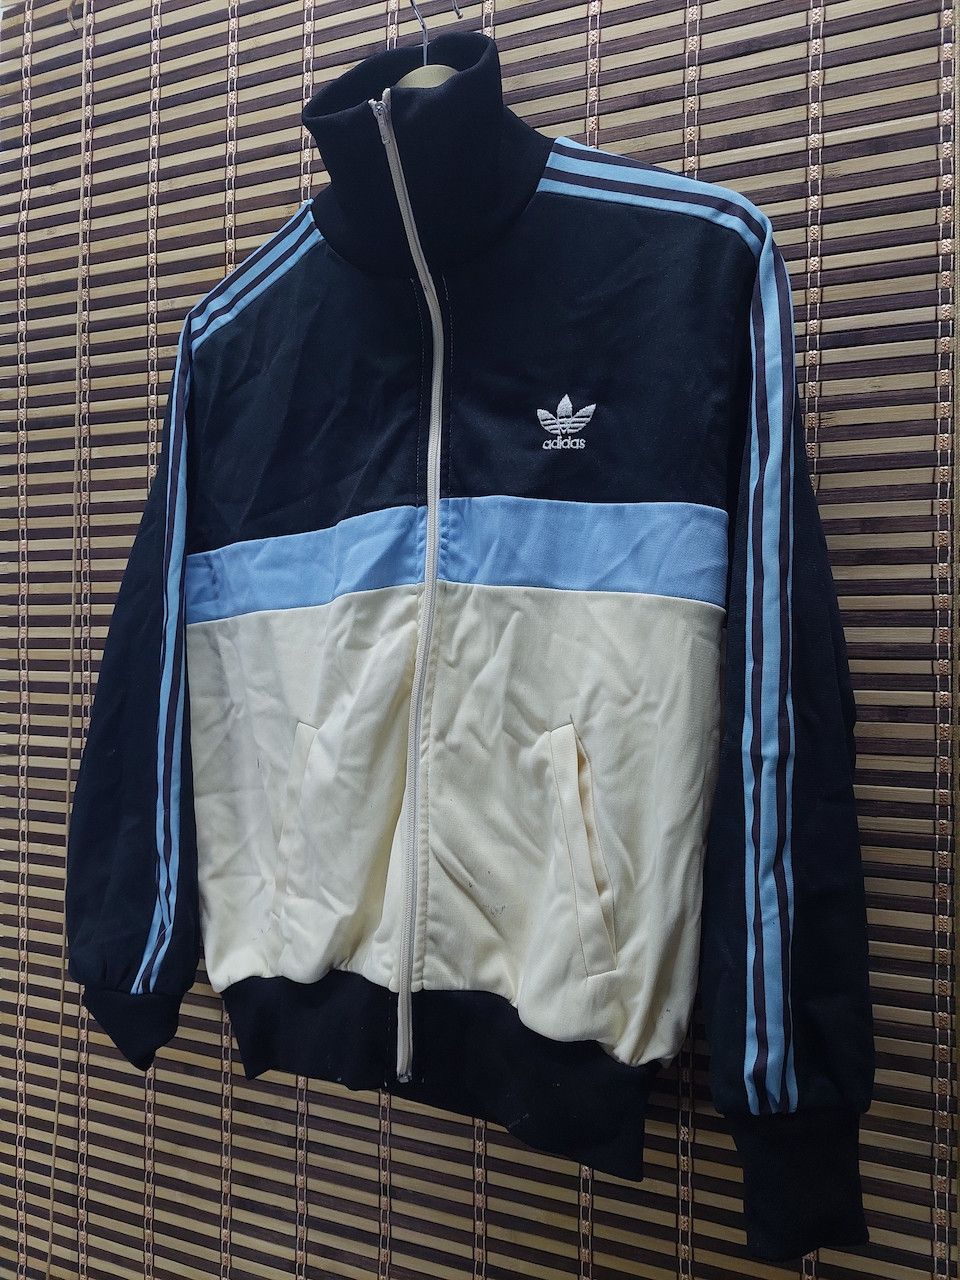 Super Vintage Adidas Tracktop Sweater Collector Items - 6